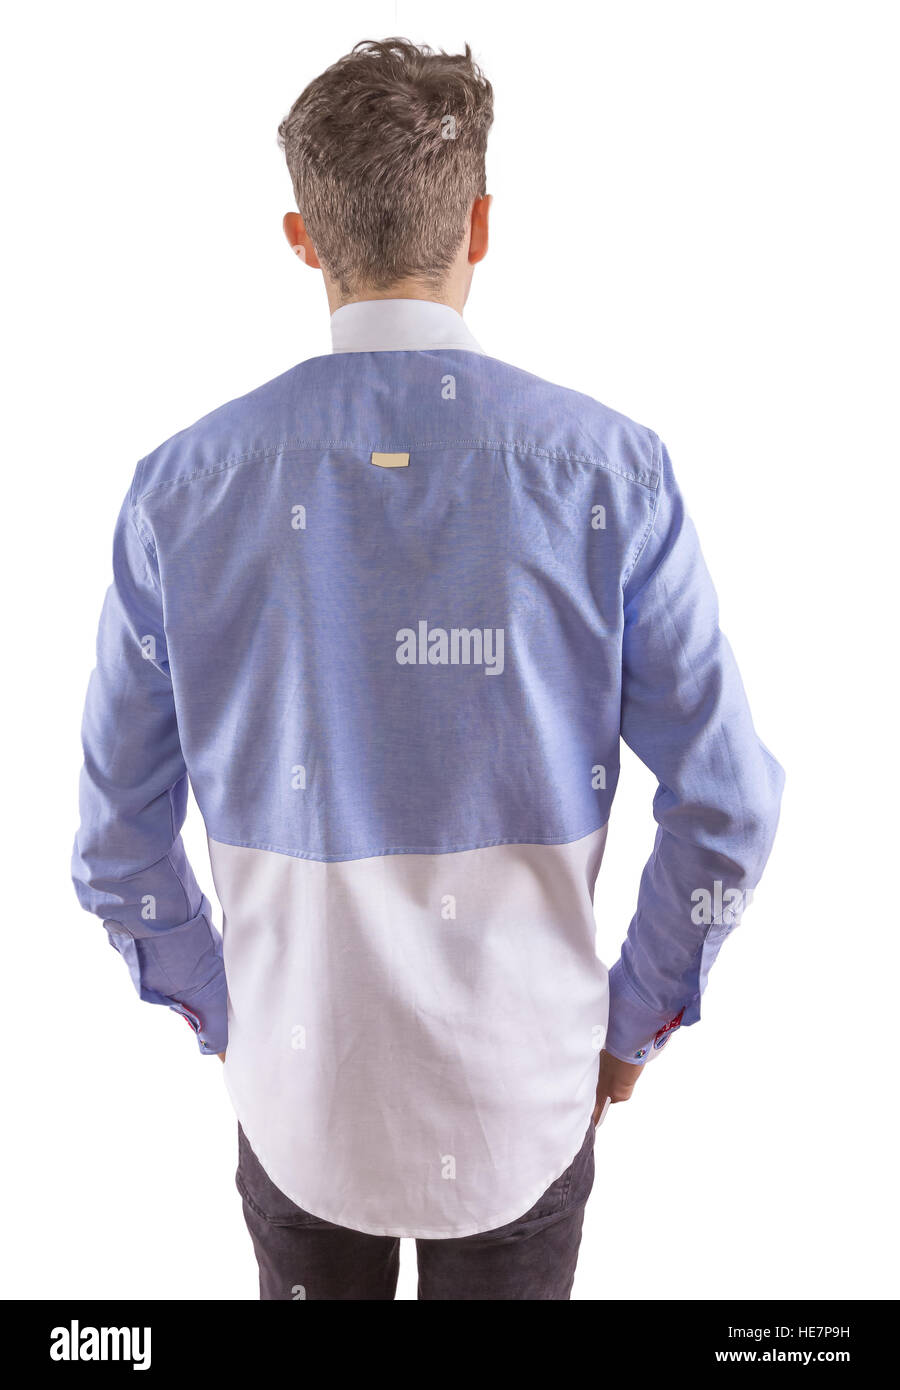 Stylish man dressed in a blue and white formal shirt, viewed from back Stock Photo